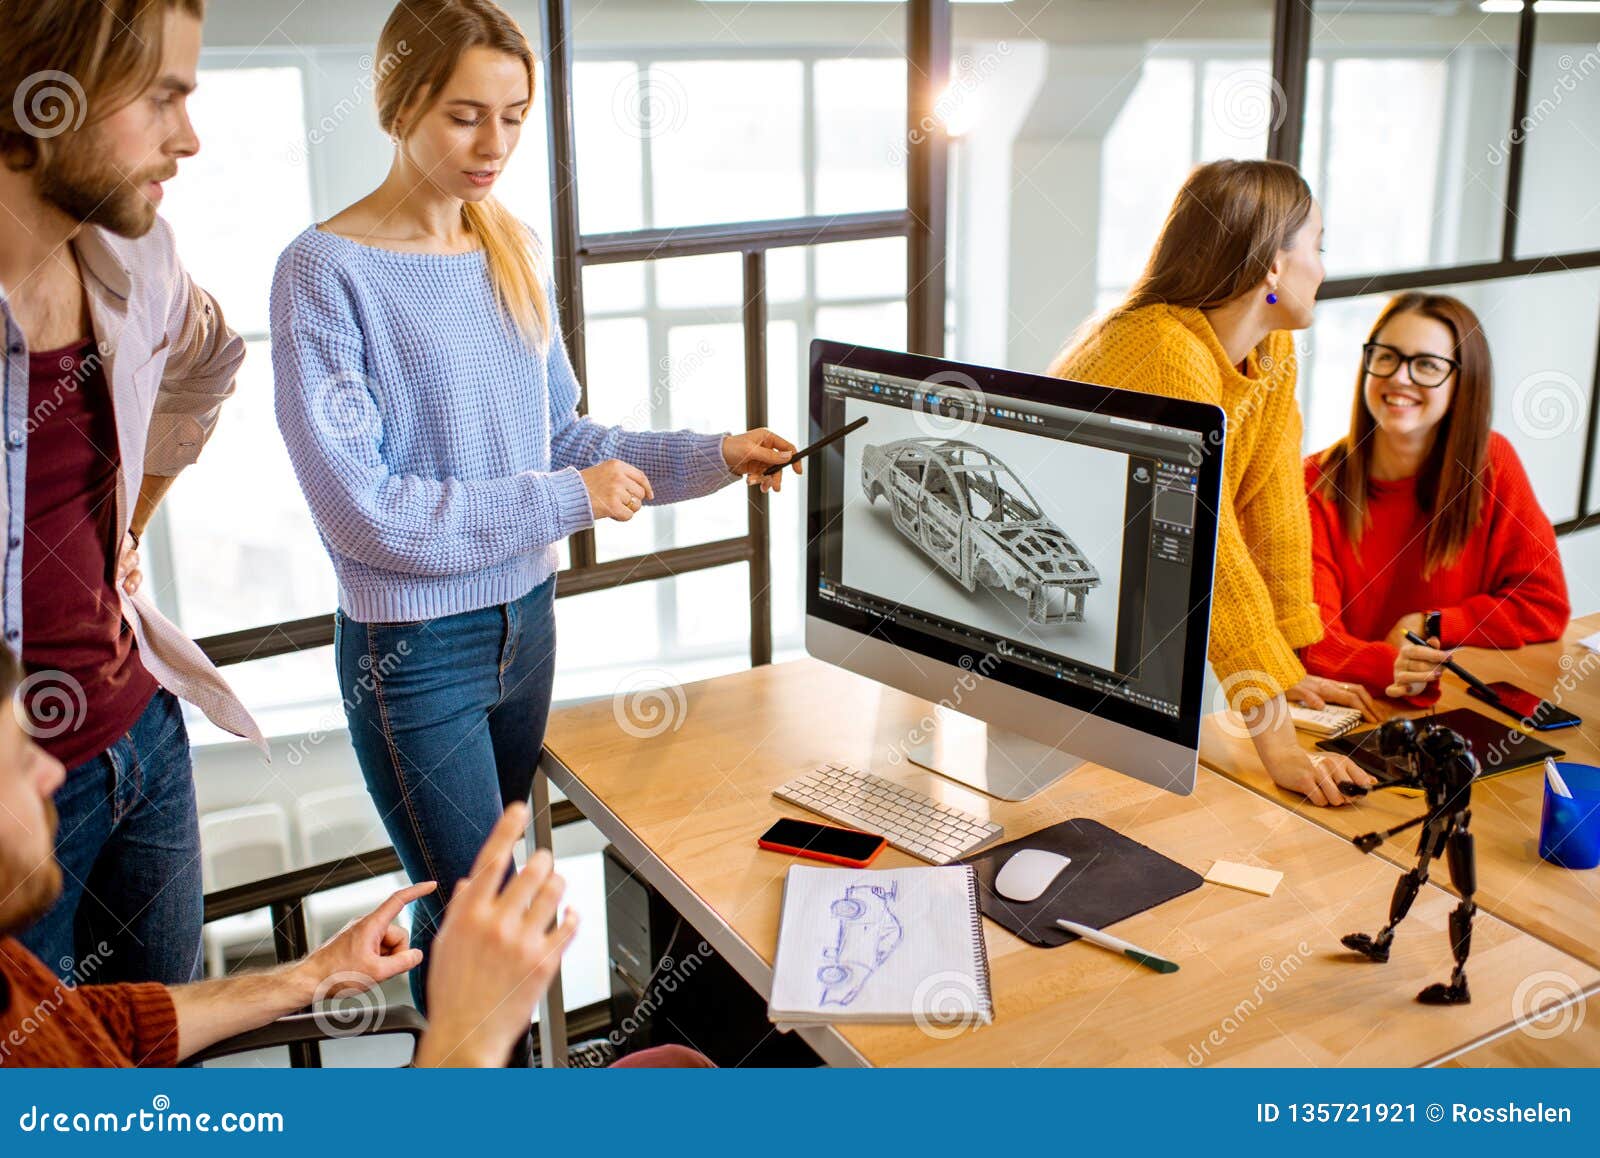 Coworkers Designing a Car Model Stock Image - Image of diverse ...